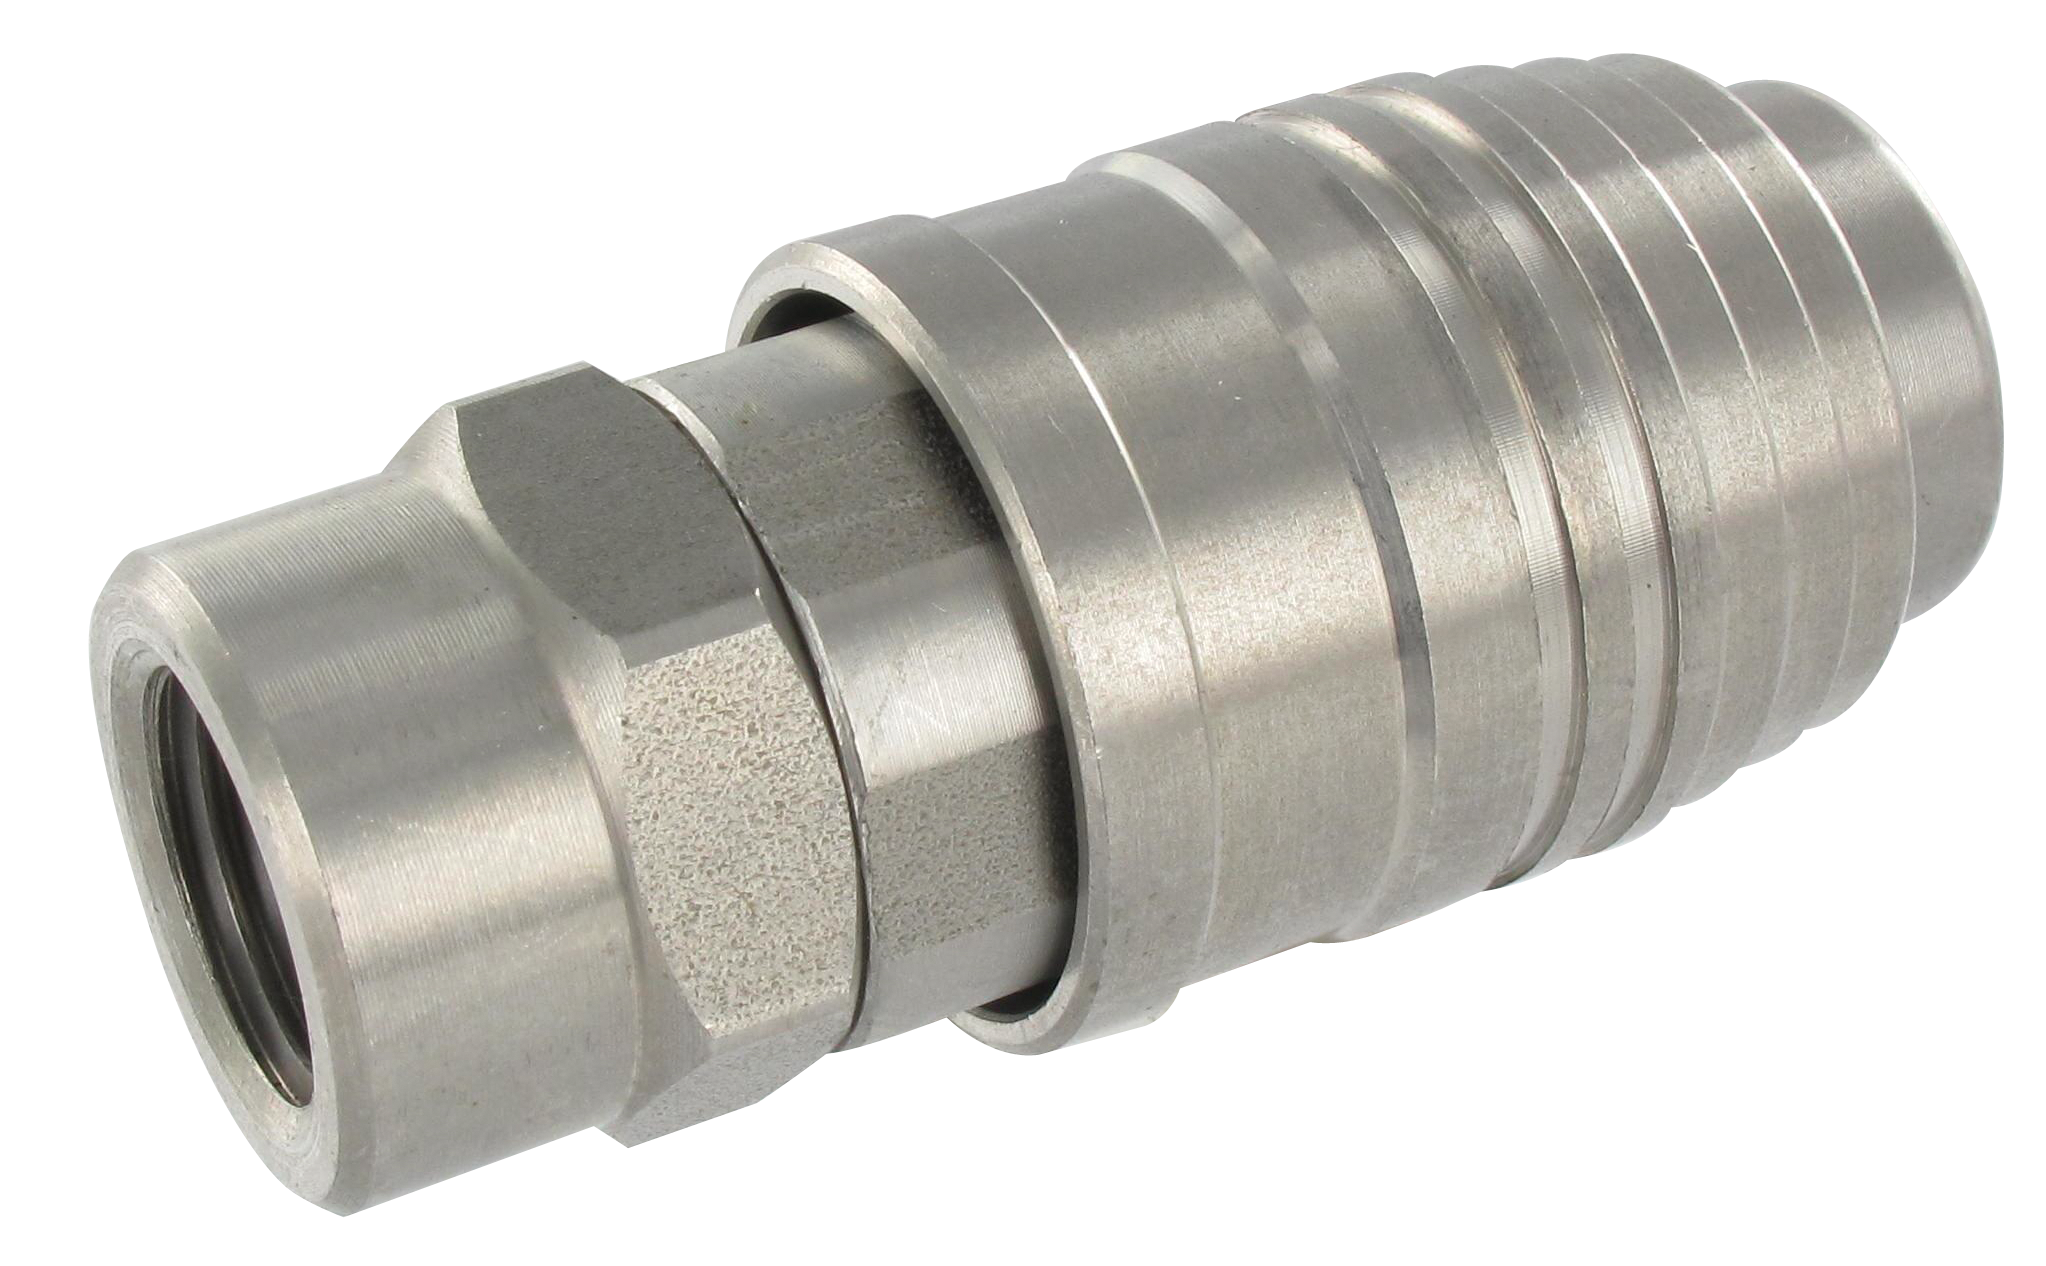 ISO-B female cylindrical couplings with 5.5 mm bore in stainless steel 303